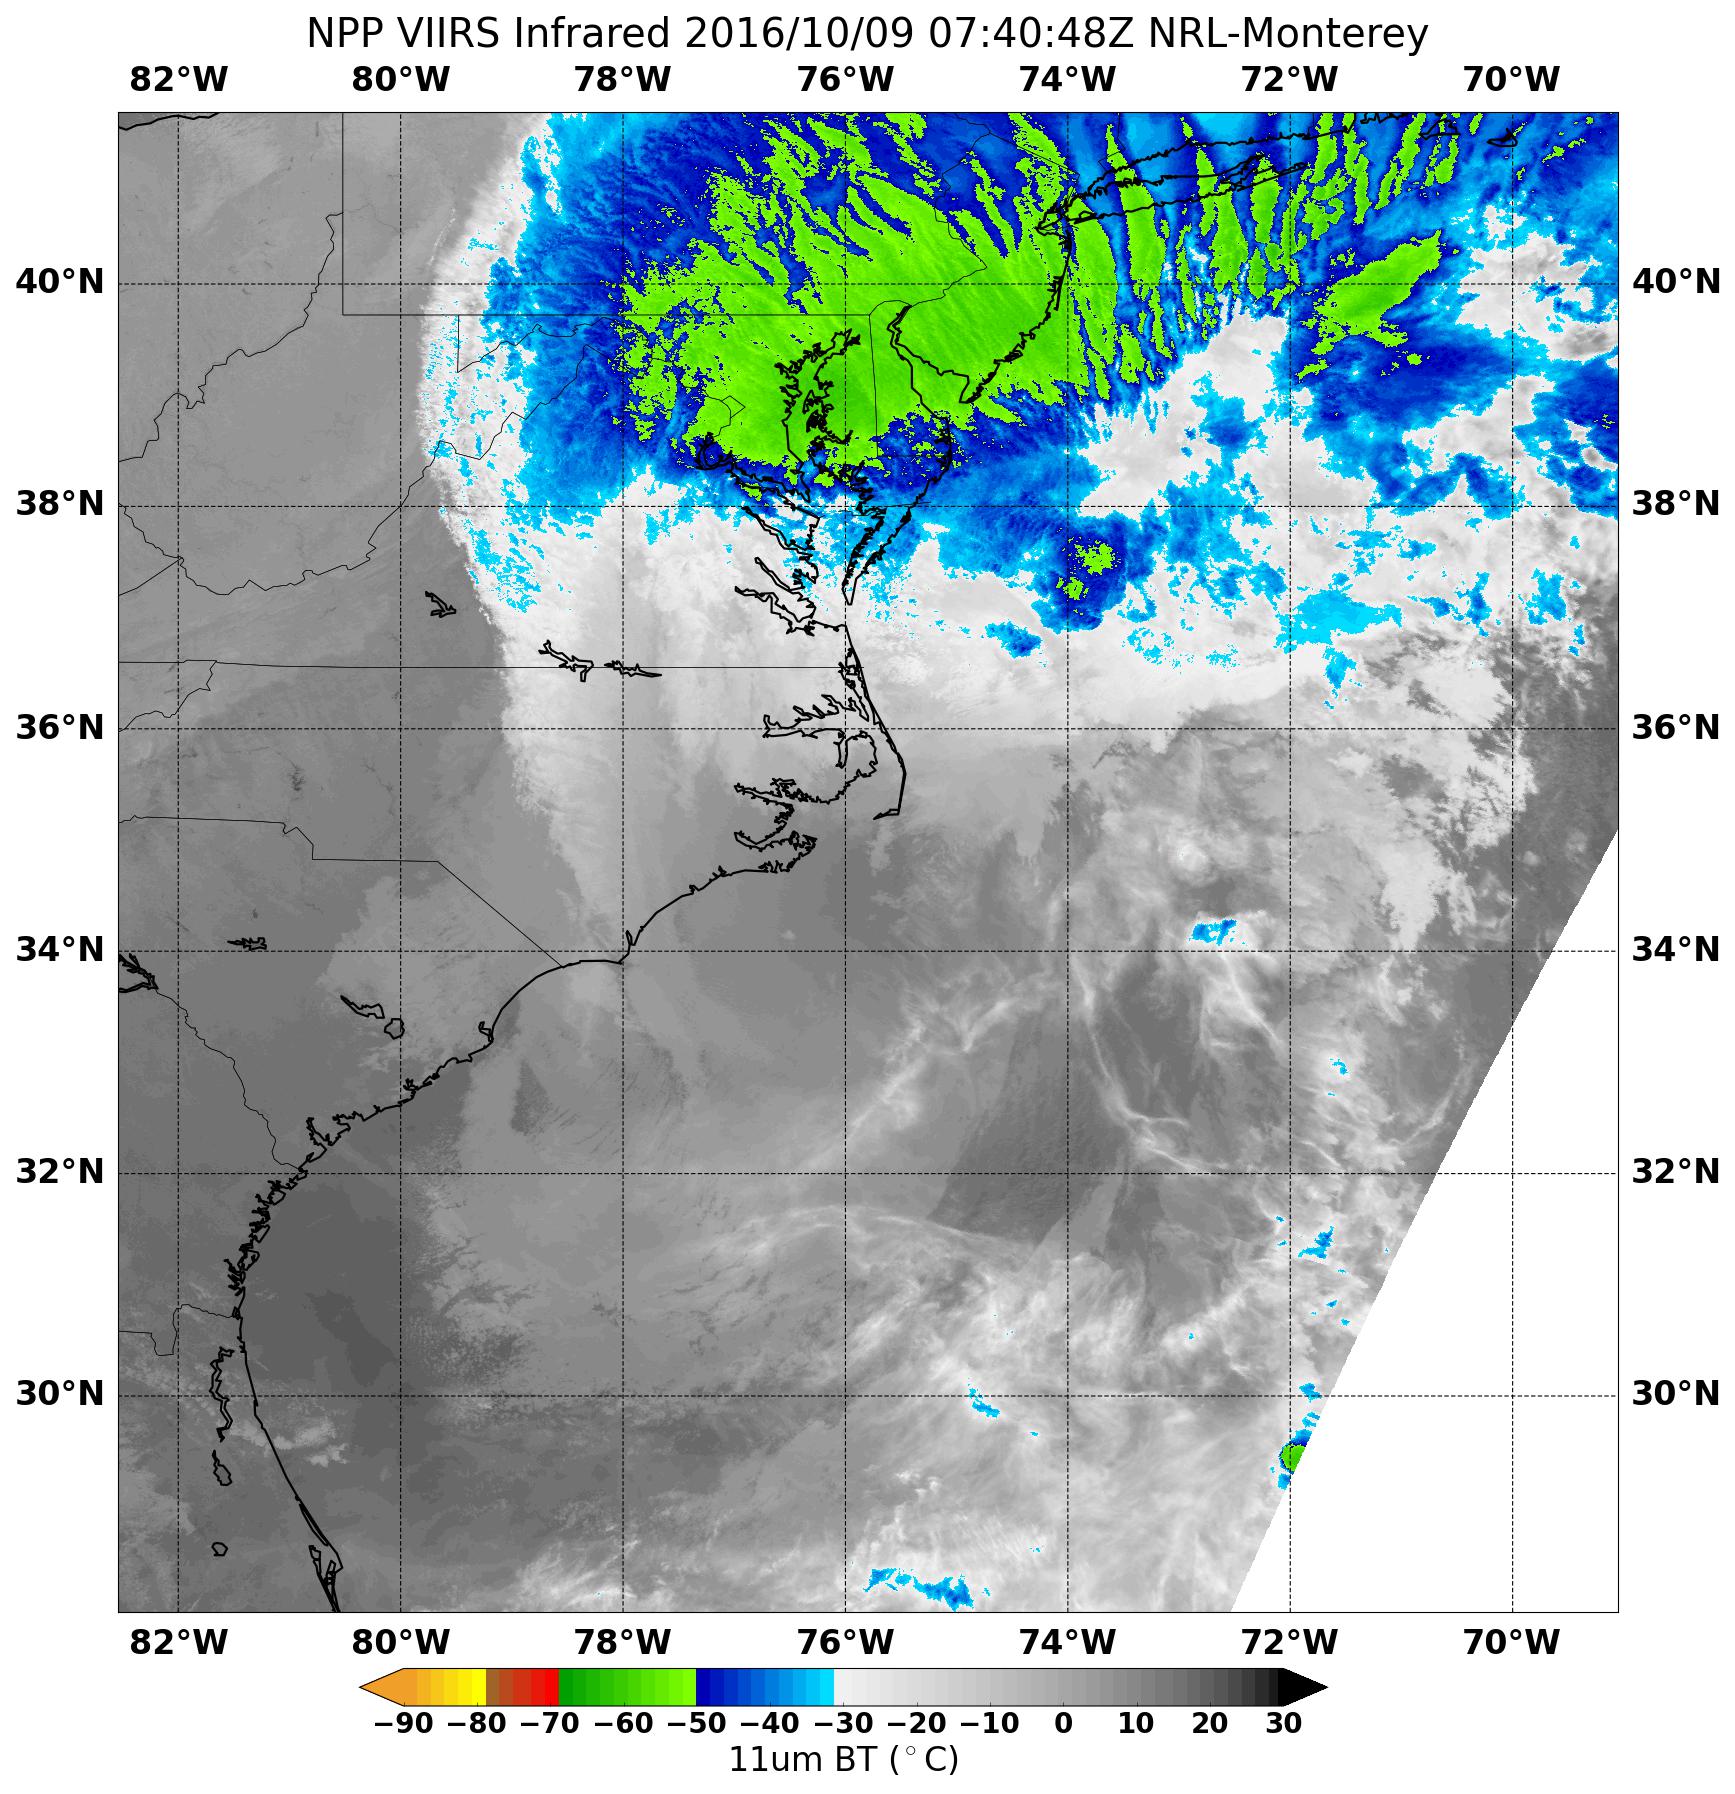 Infrared satellite view of Hurricane Matthew, with clouds colored blue and green over the northern Atlantic coast of the US